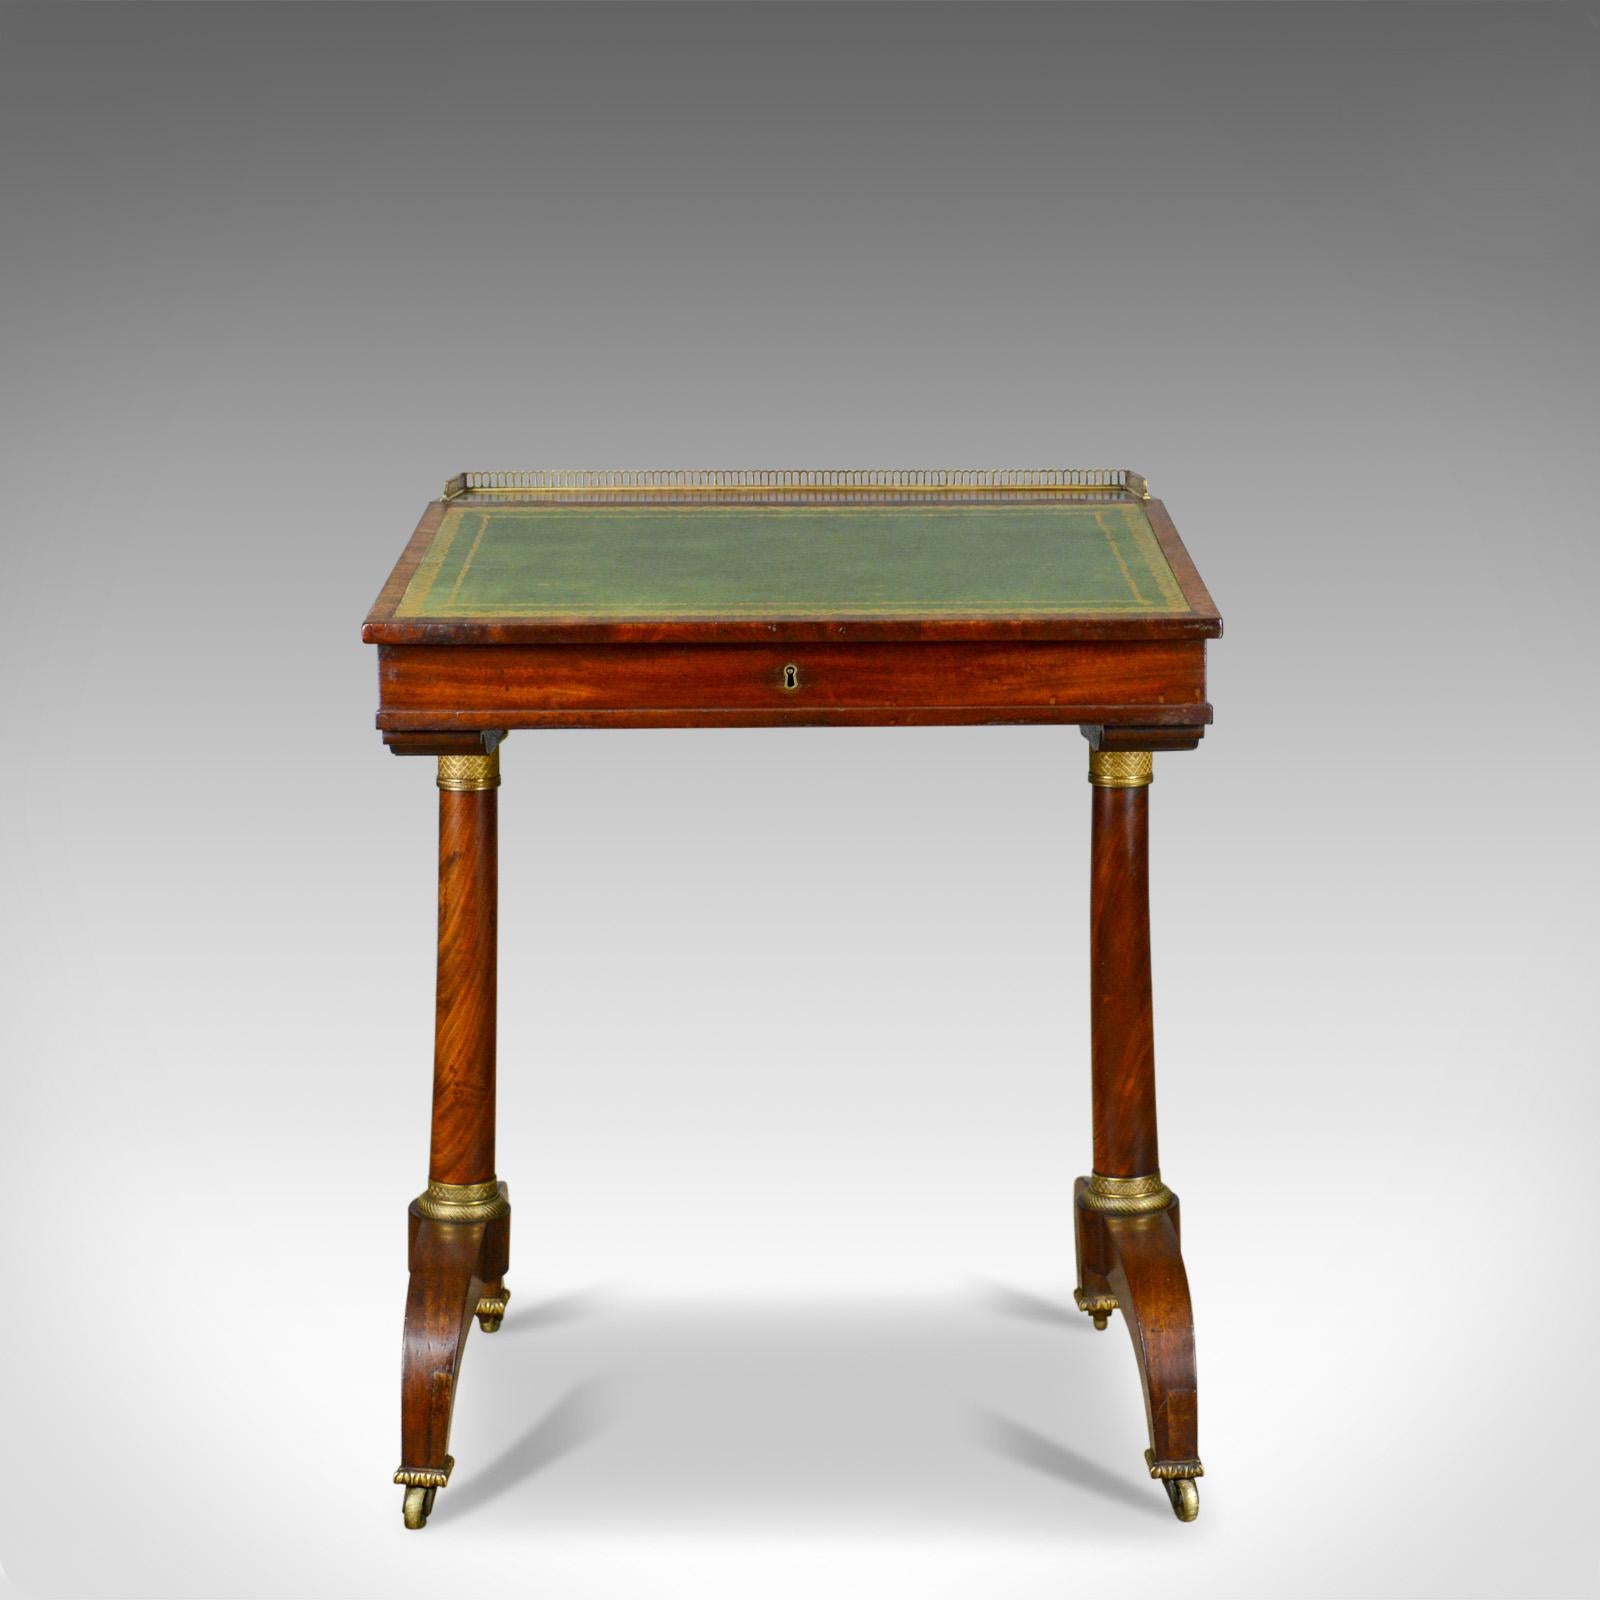 This is an antique writing table, an English, Regency, mahogany, open Davenport dating to the early 19th century, circa 1820.

Of quality craftsmanship in select mahogany
Good colour with a desirable aged patina
Grain interest throughout with a